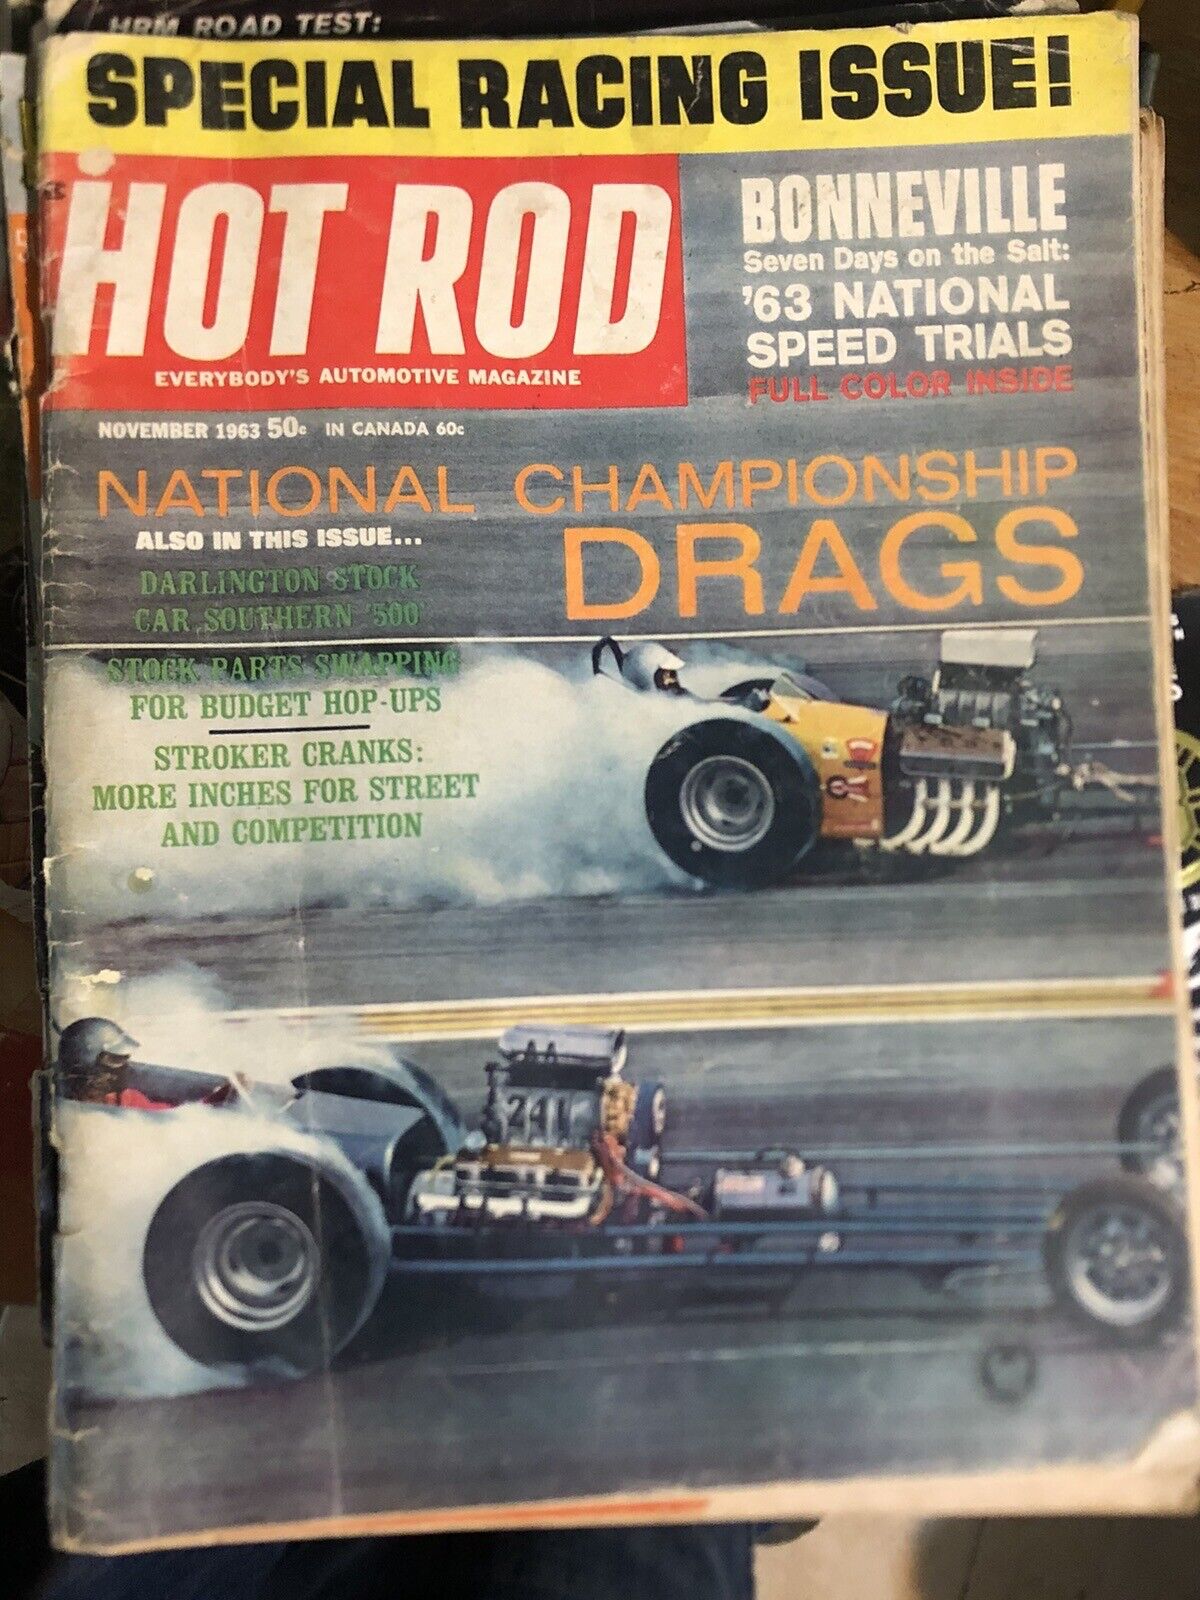 Vintage Hot Rod Magazine Nov 1963 Special Racing Issue- Nat. Championship Drags